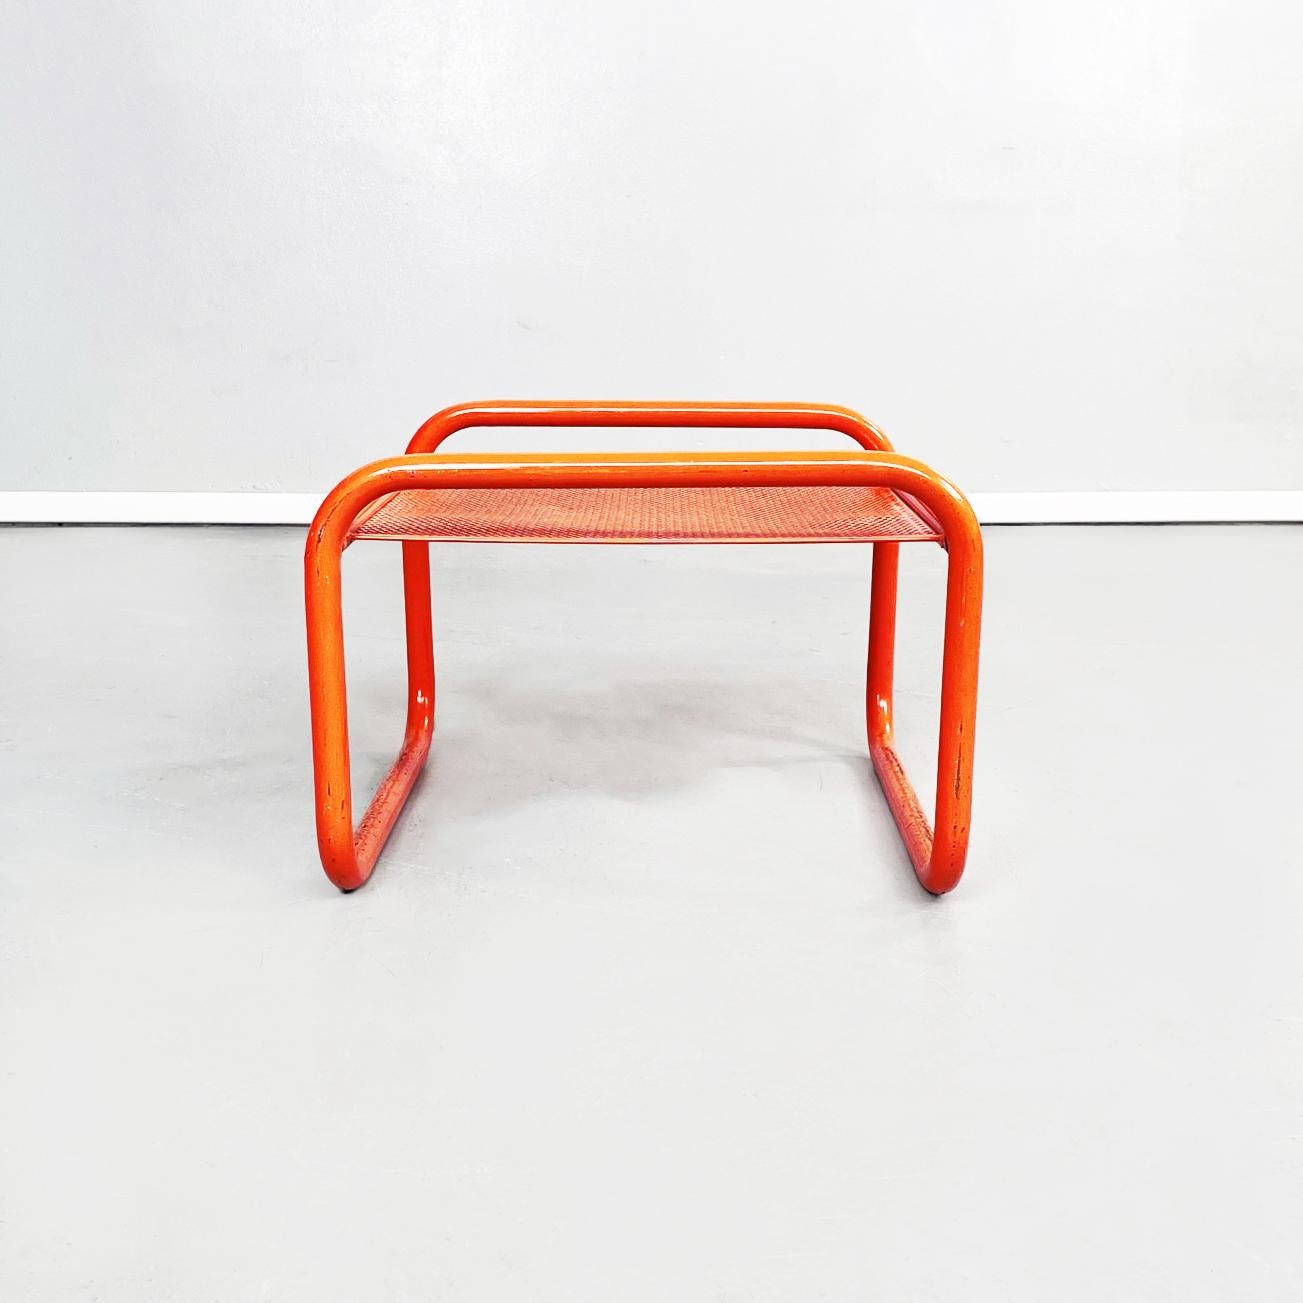 Beautiful and very rare Italian mid-century Orange Footstools Locus Solus by Gae Aulenti for Poltronova, 1960s
Pair of footrests from the series Locus Solus in orange painted metal. The rectangular top is perforated. The structure is in